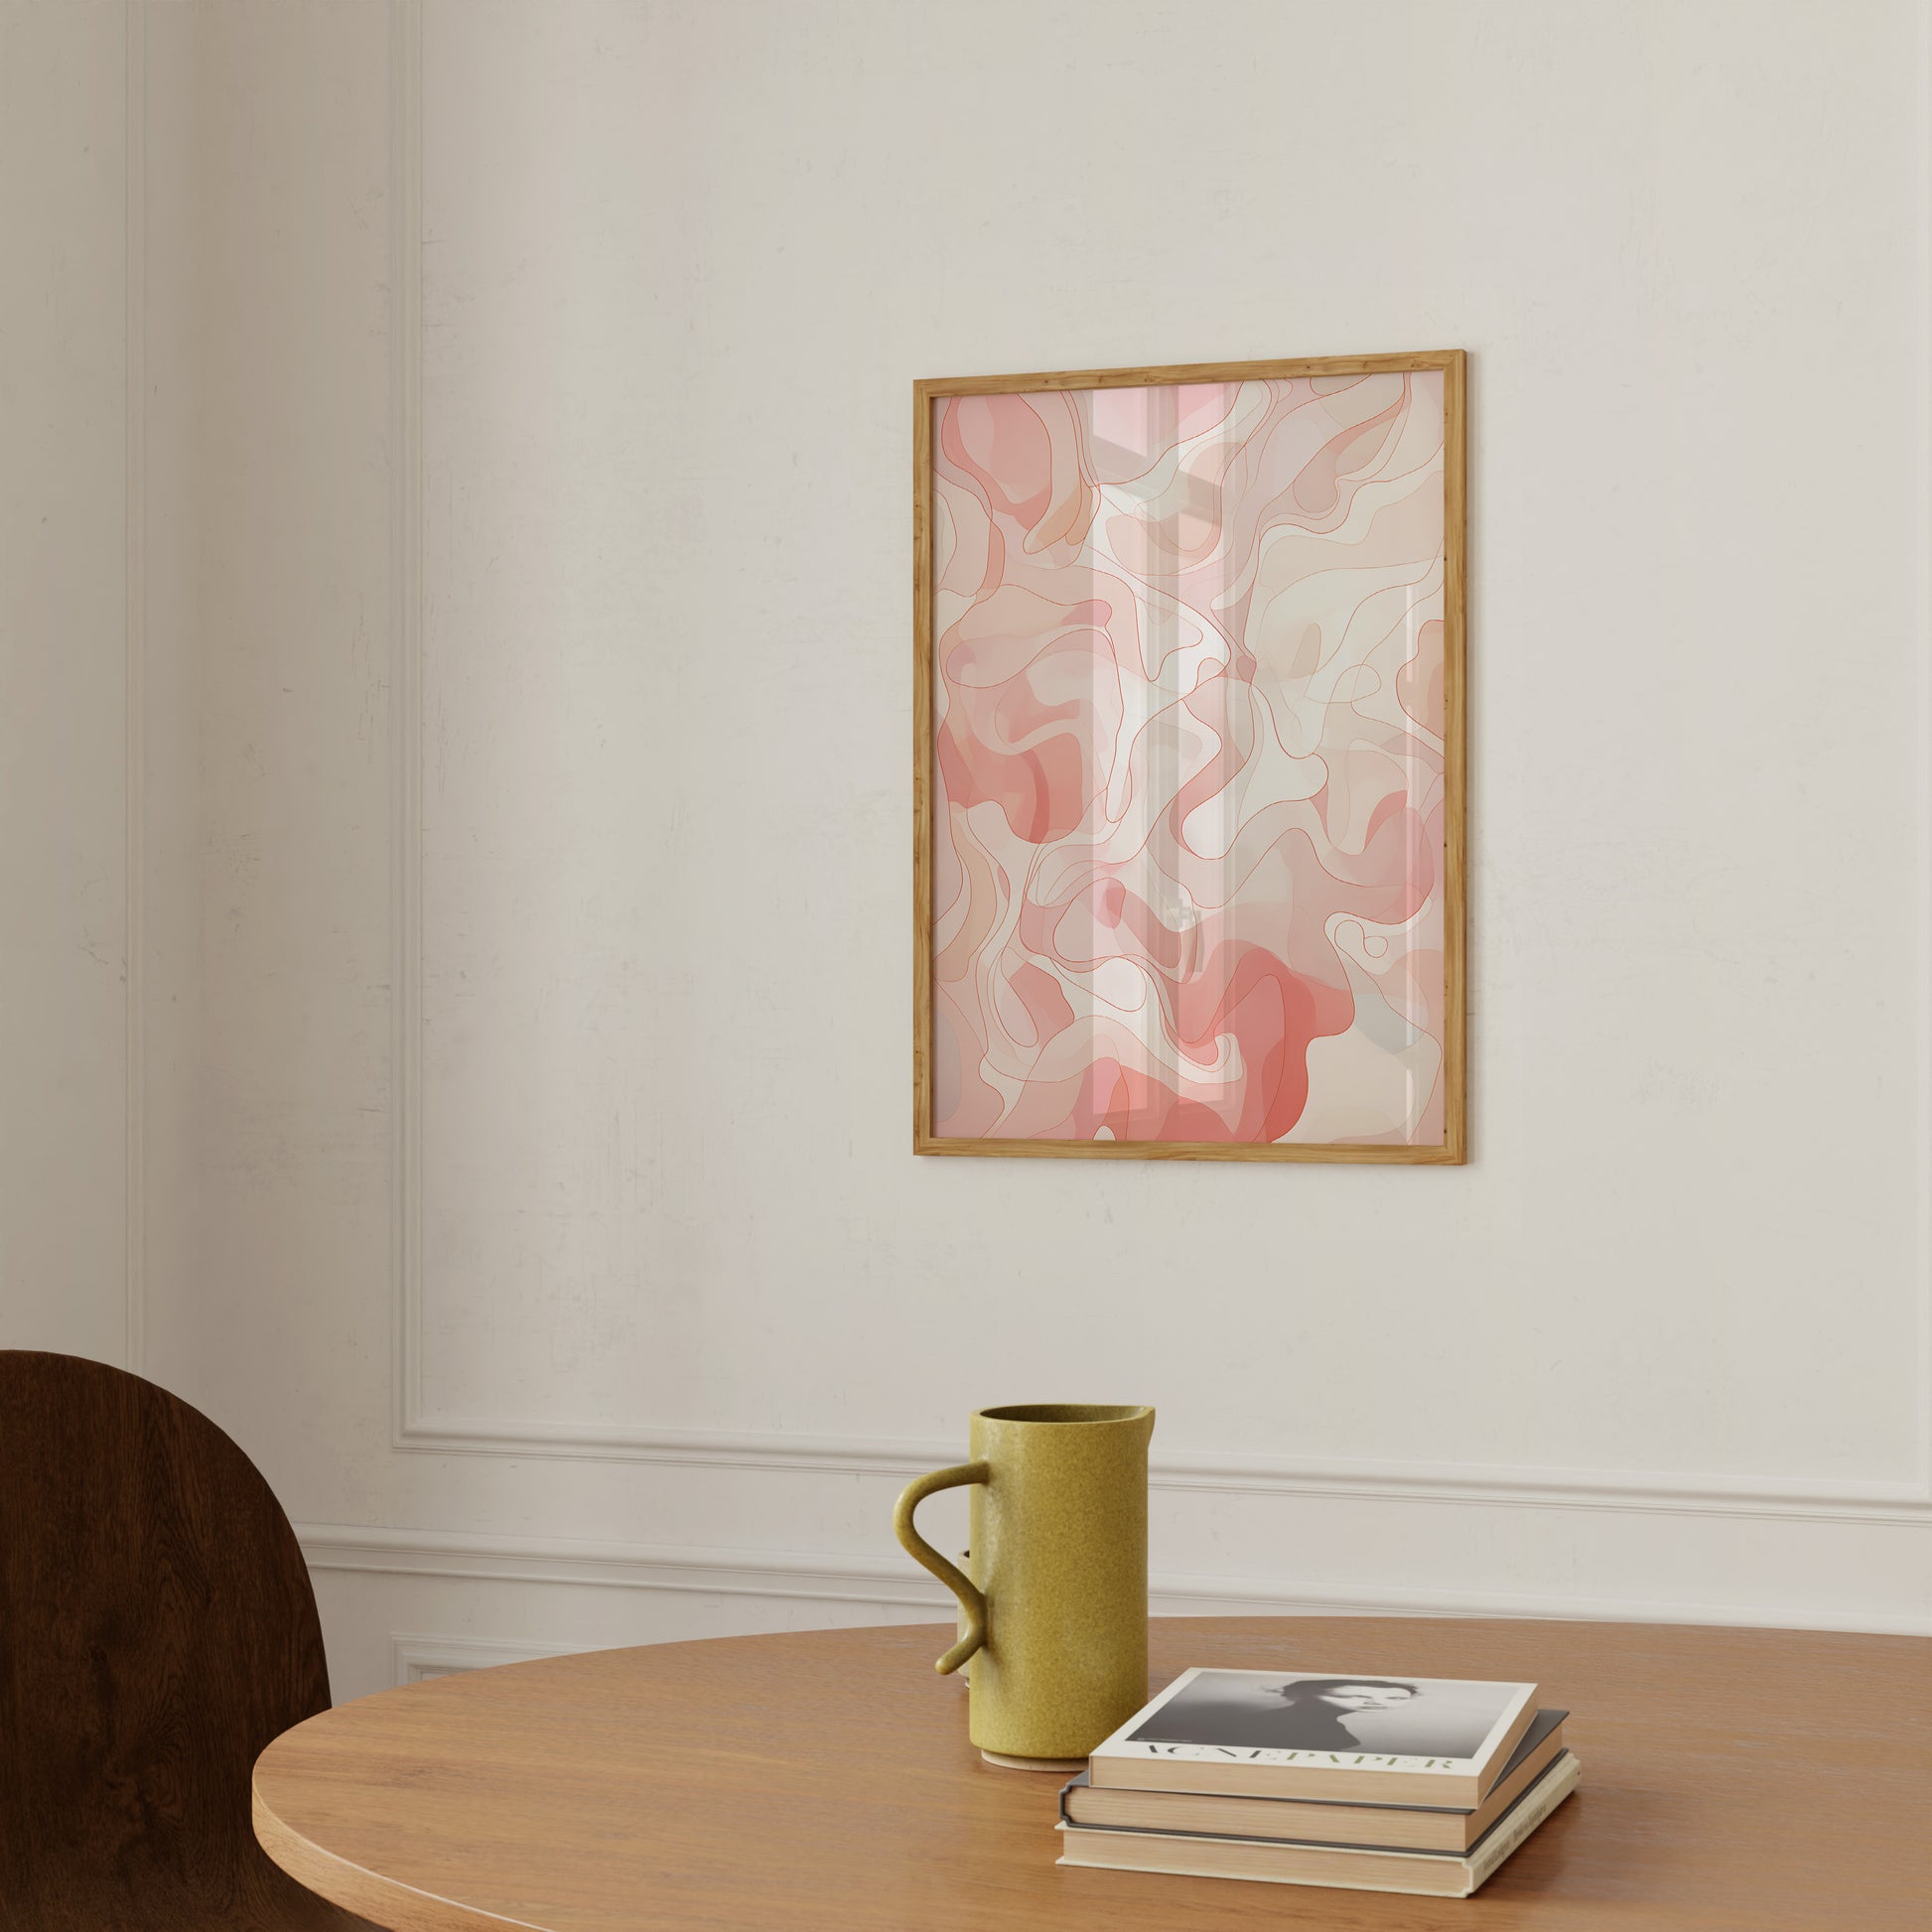 An abstract painting on a wall above a table with a yellow mug and books.